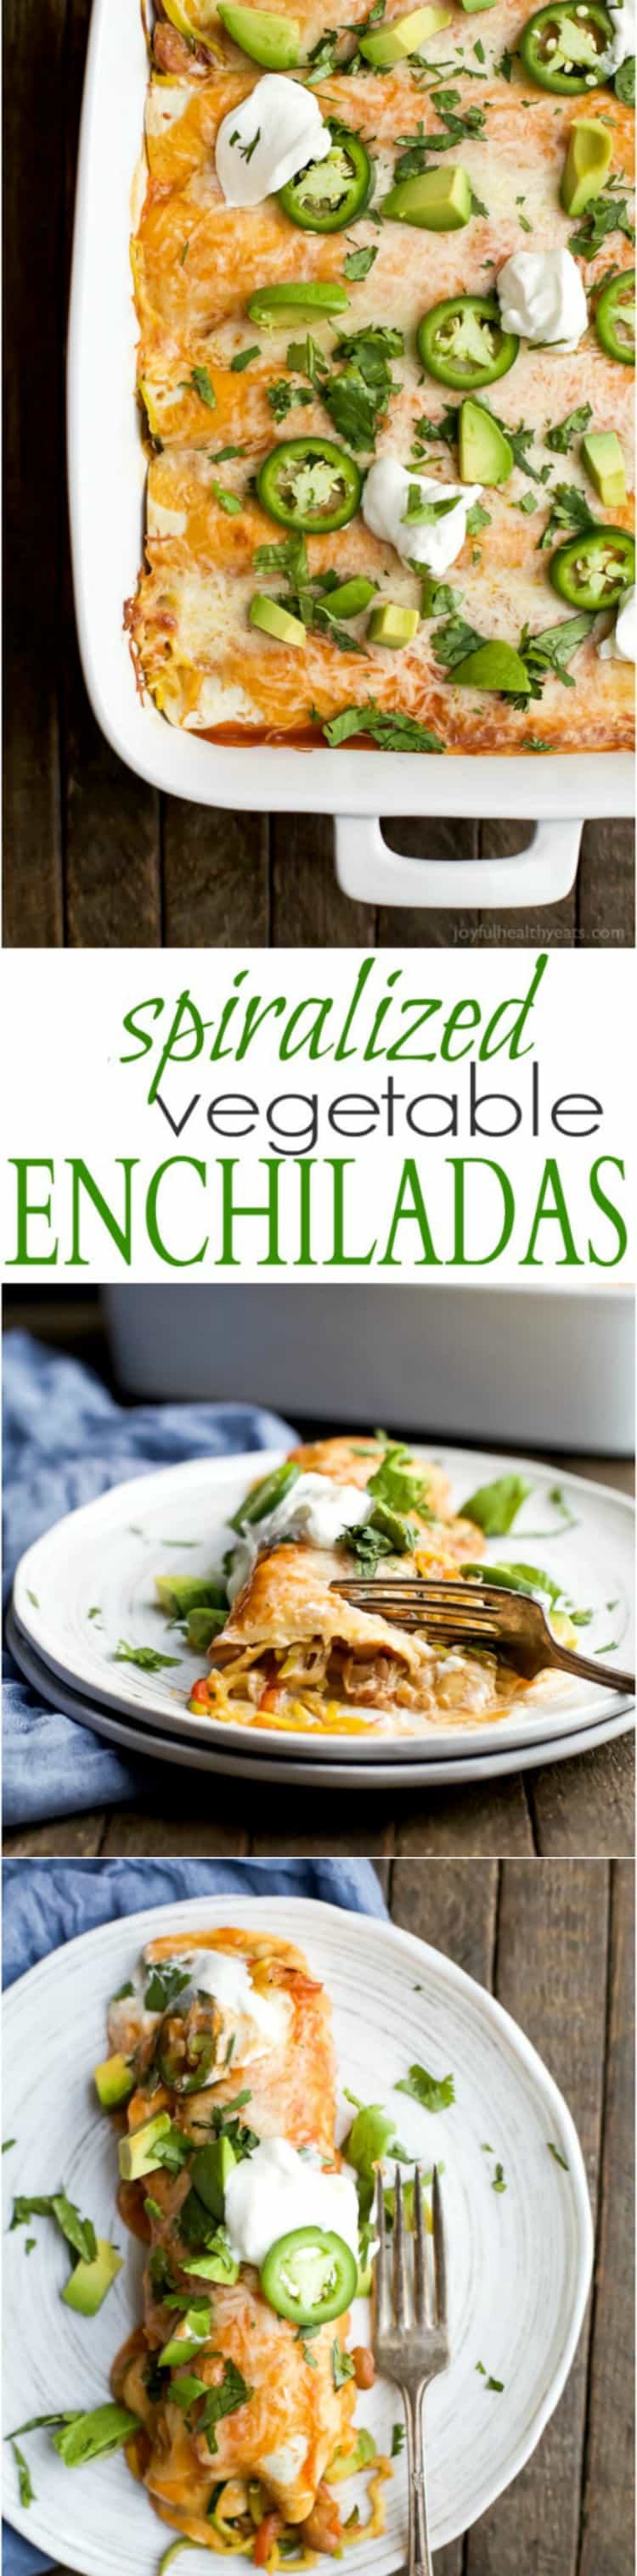 Spiralized Vegetable Enchiladas are a easy light 30 minute meal. Perfect for your next taco night or quick weeknight dinner!